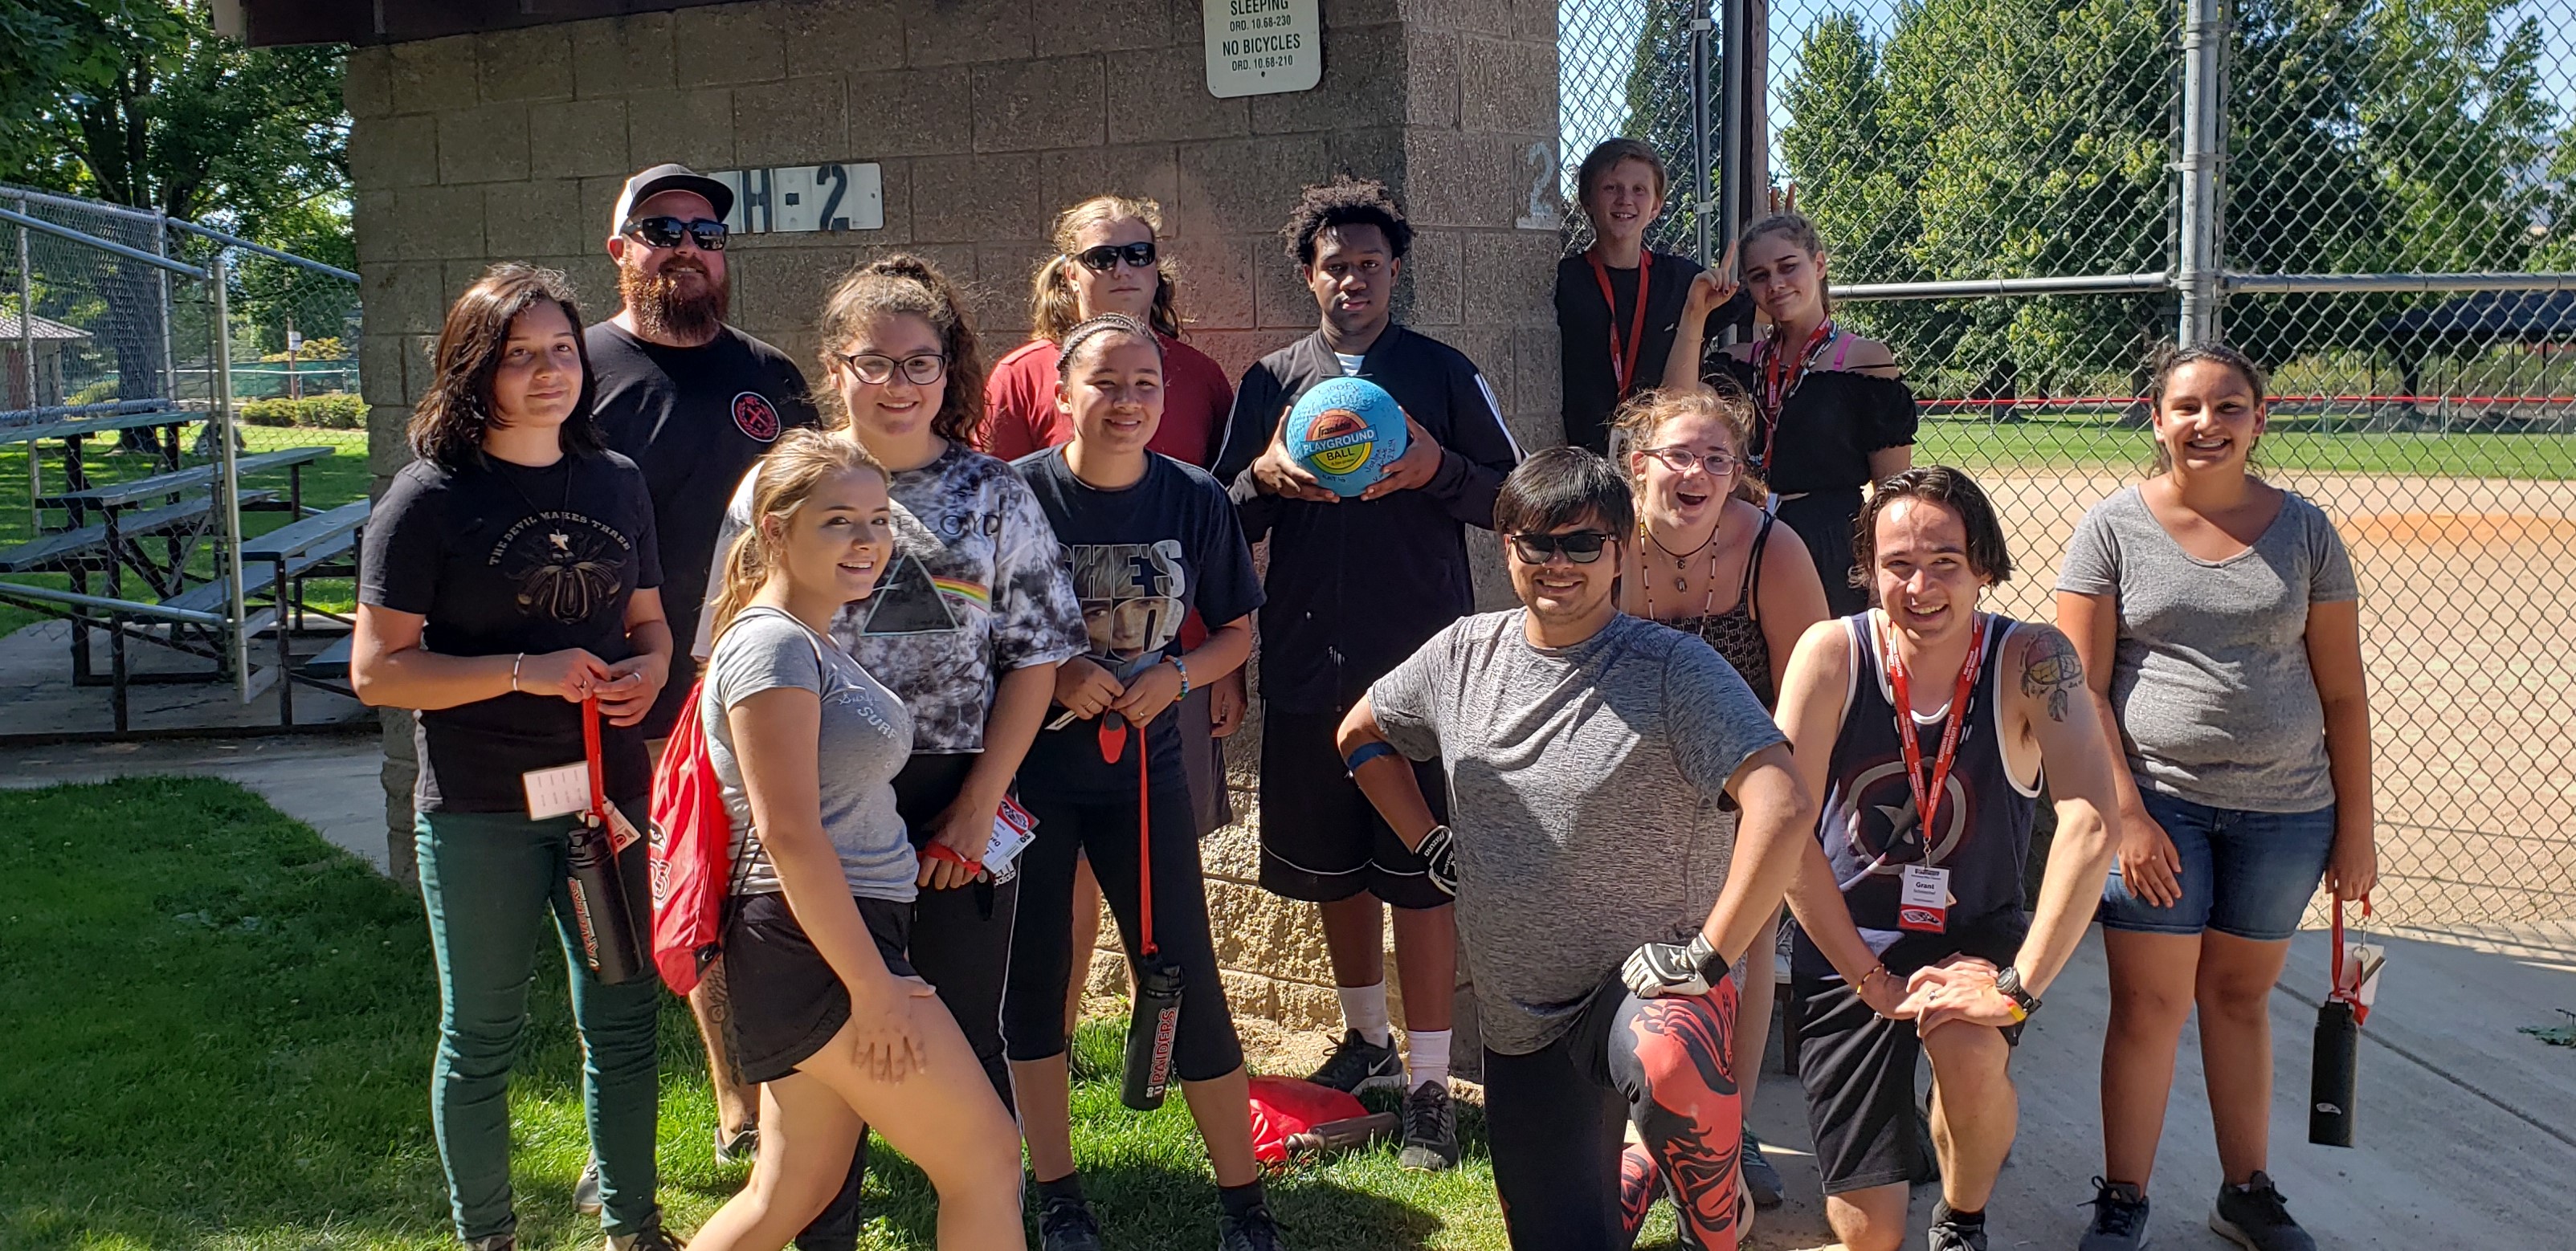 A group of students smiling after playing dodgeball together